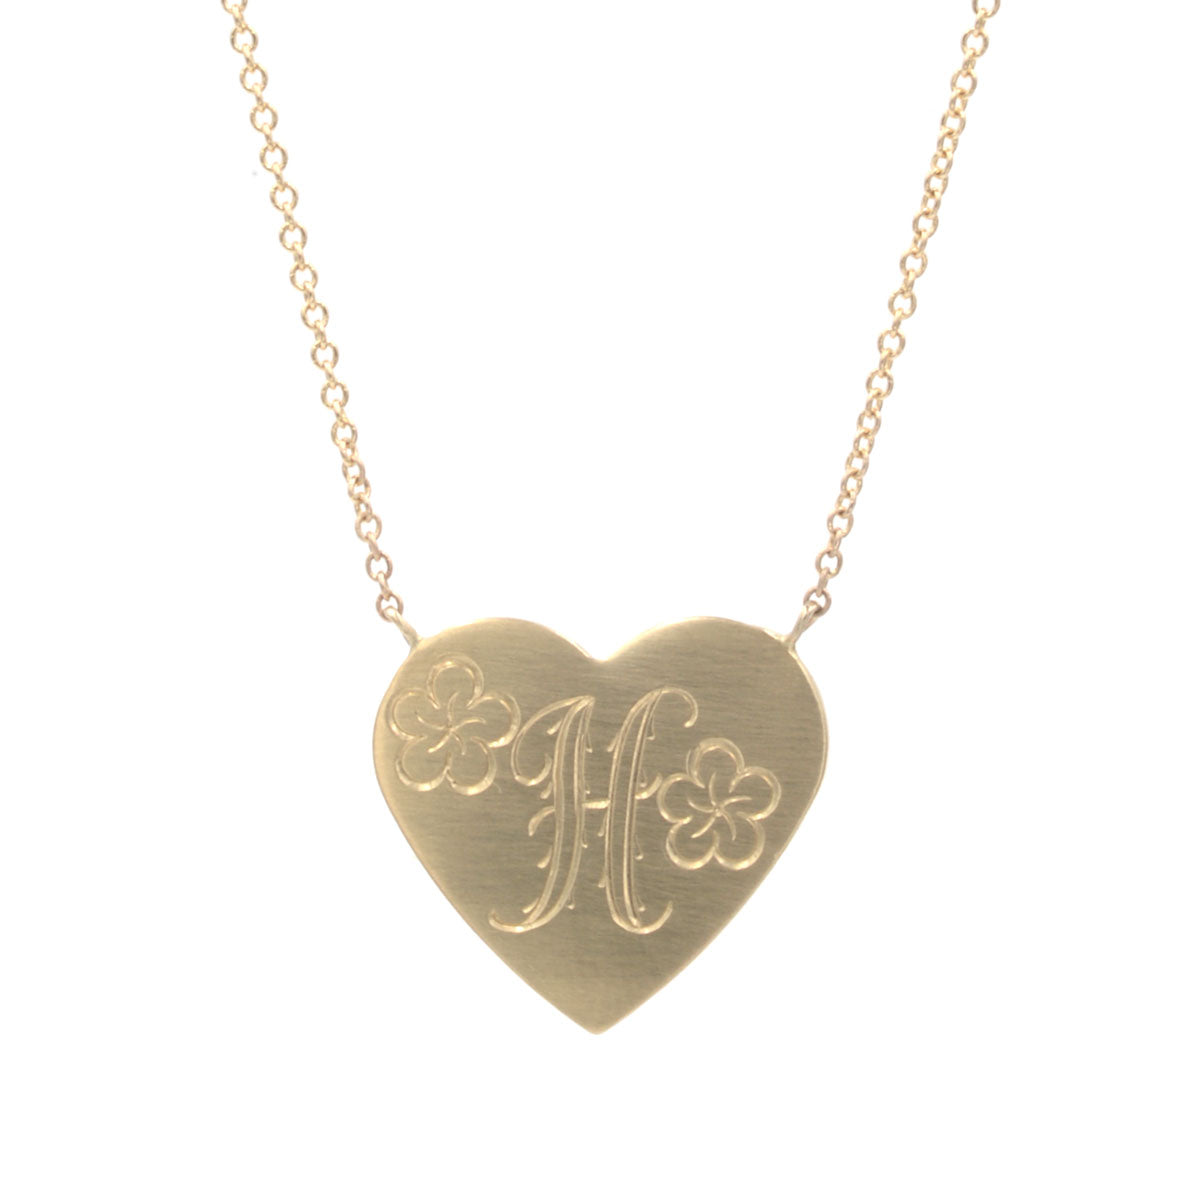 Floral Hand Engraved initials Signet Monogram Heart Necklace Charm Pendant 14K Rose Gold / Front Side Only